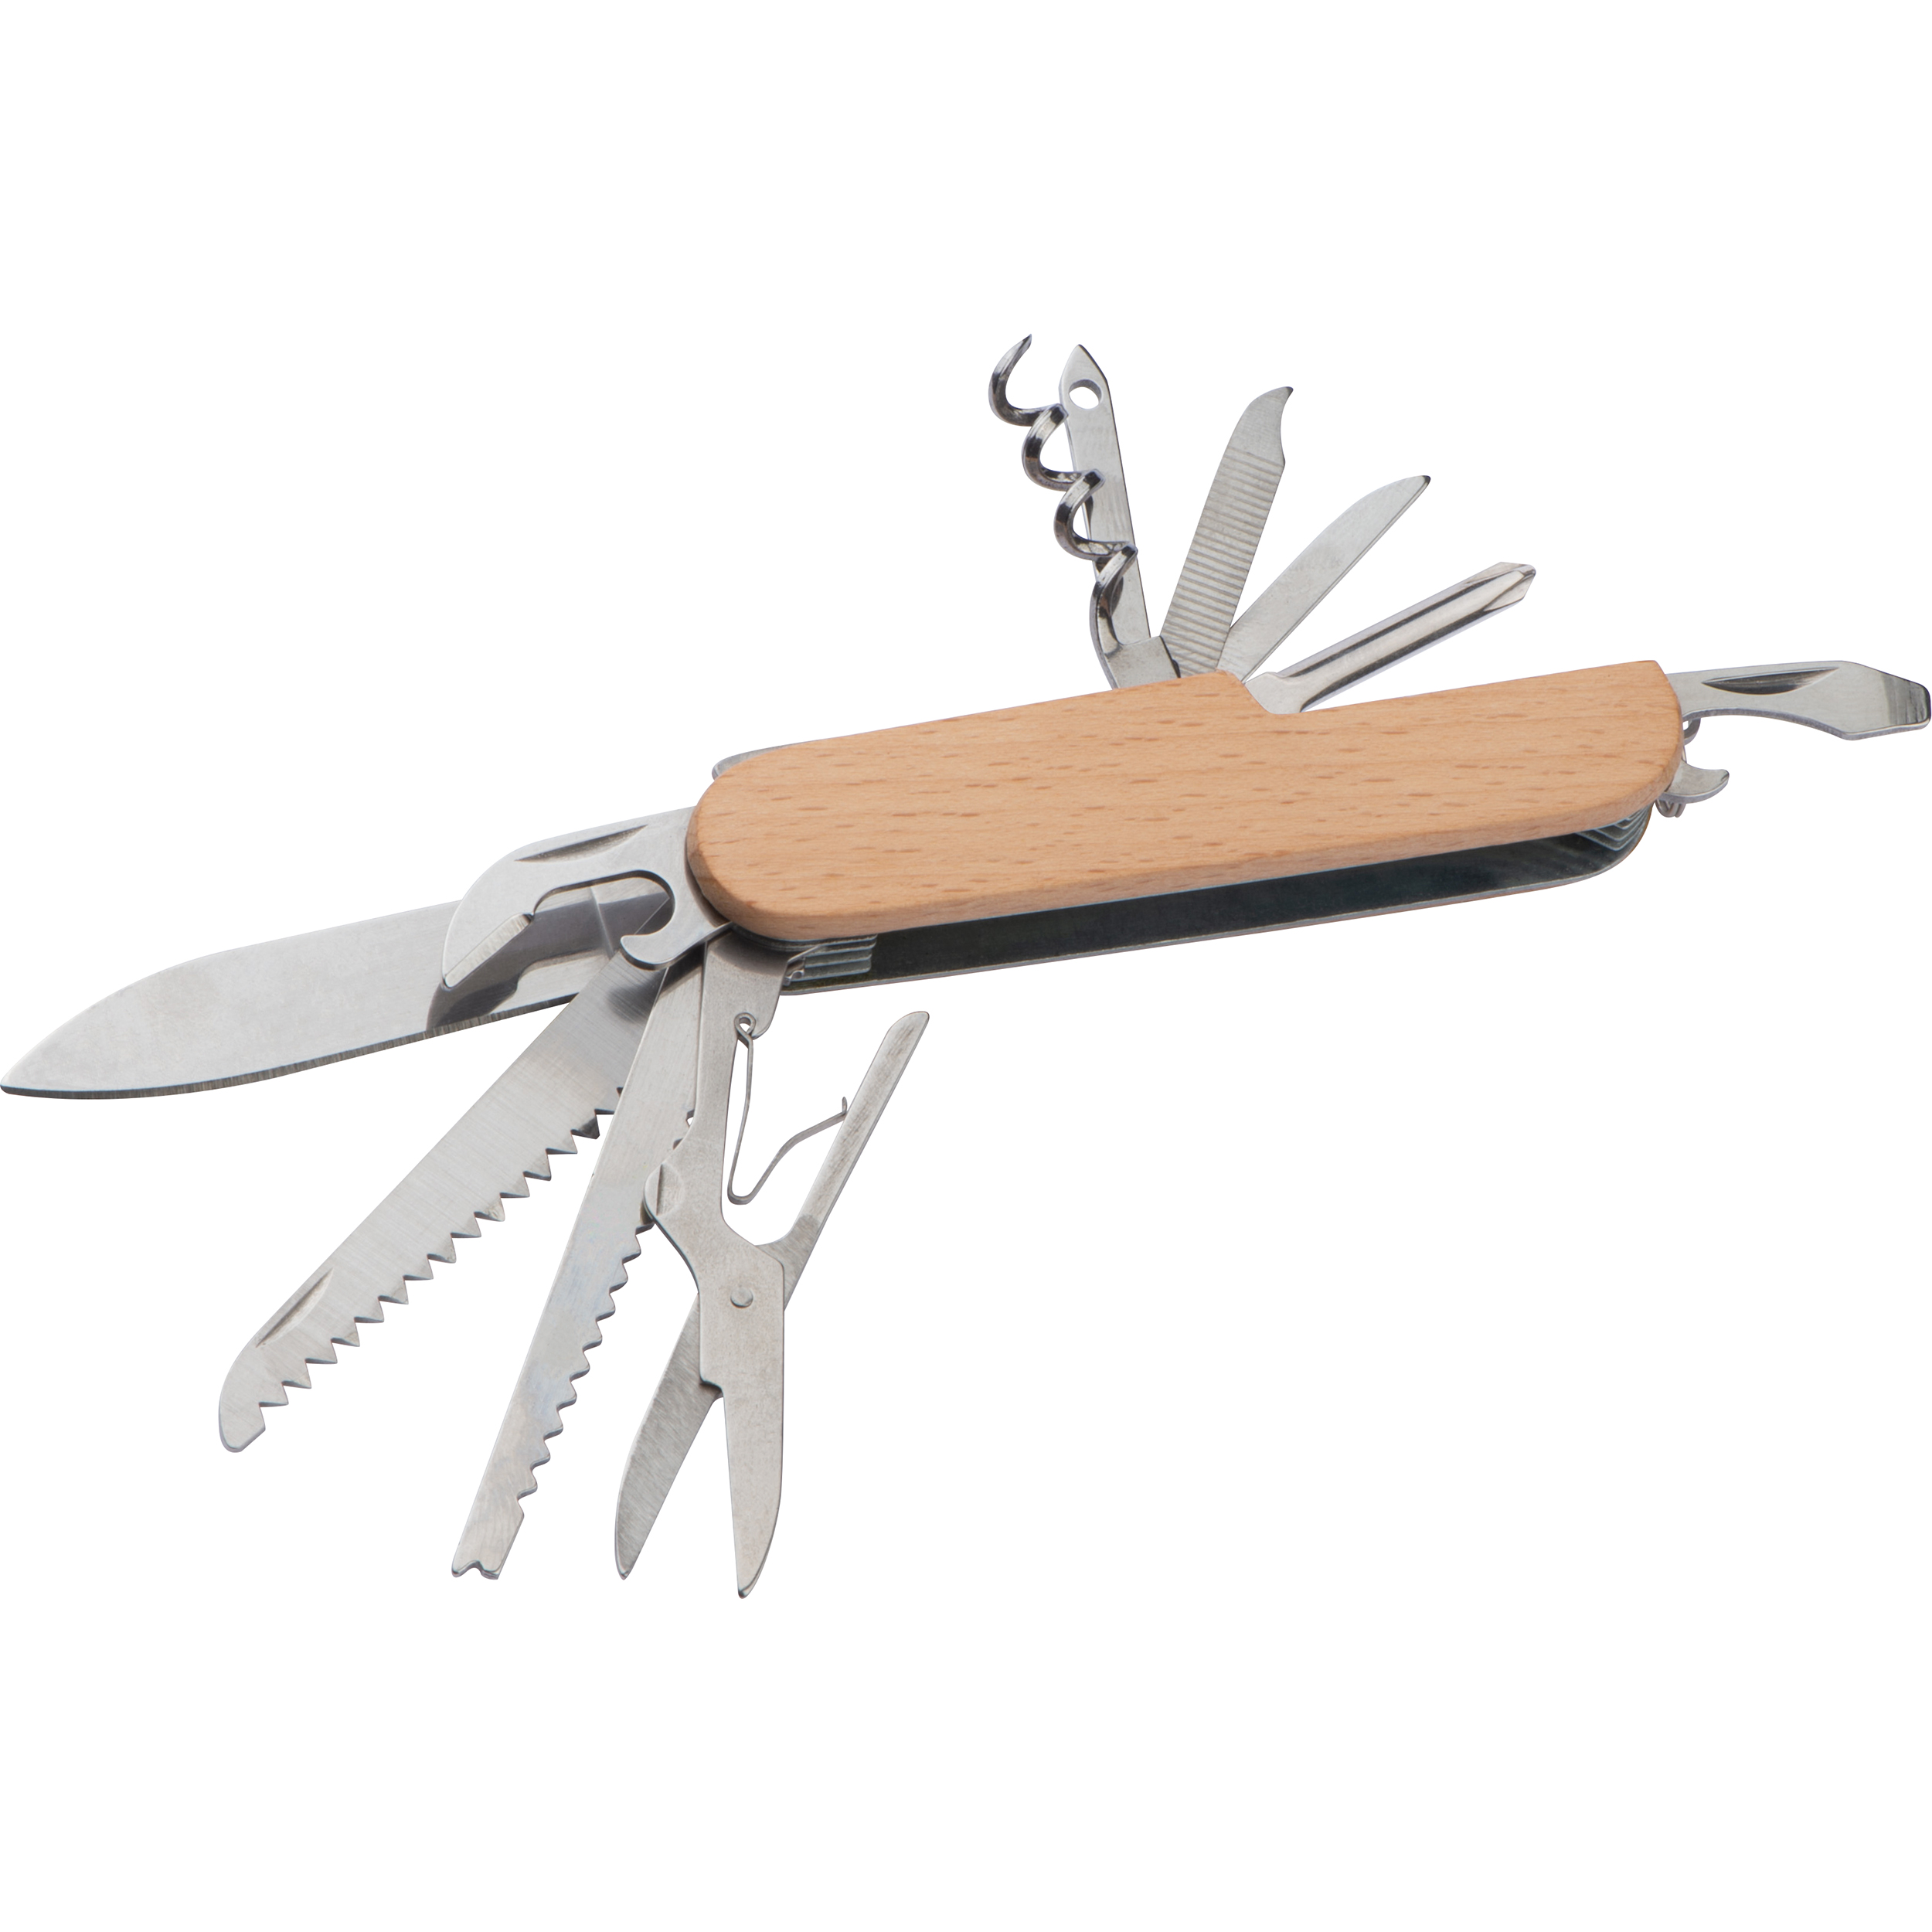 11-Parts stainless steel pocket knife